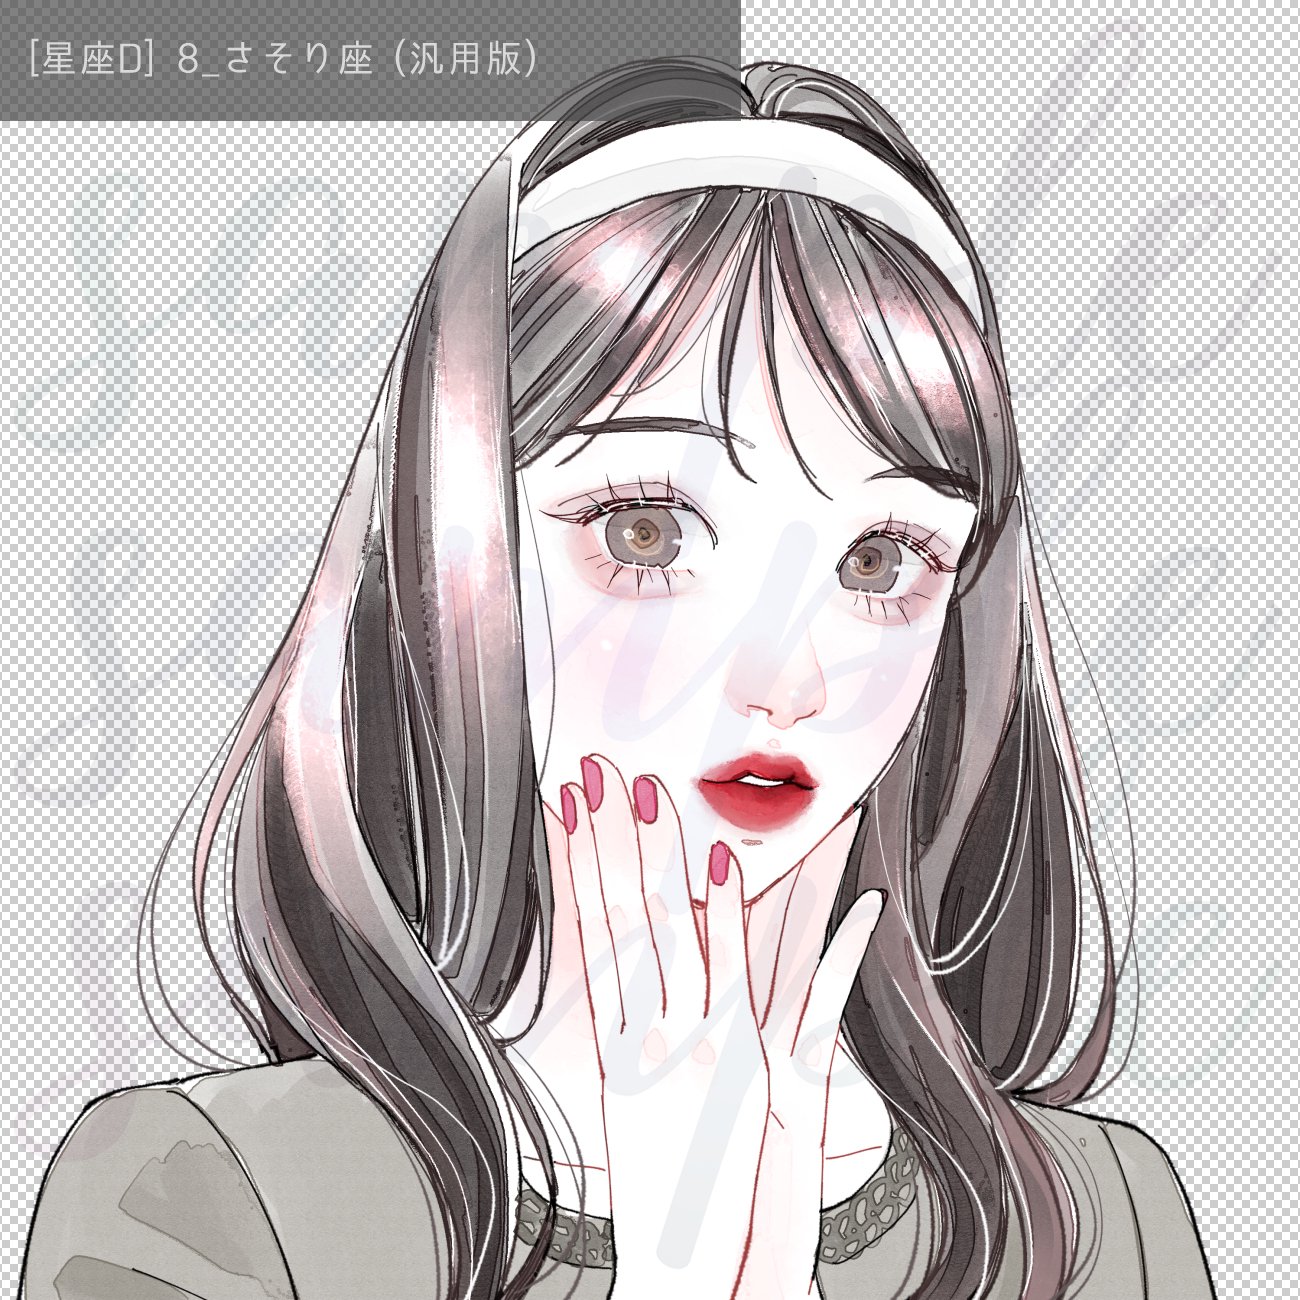 <img class='new_mark_img1' src='https://img.shop-pro.jp/img/new/icons32.gif' style='border:none;display:inline;margin:0px;padding:0px;width:auto;' />[D] 8_ ()